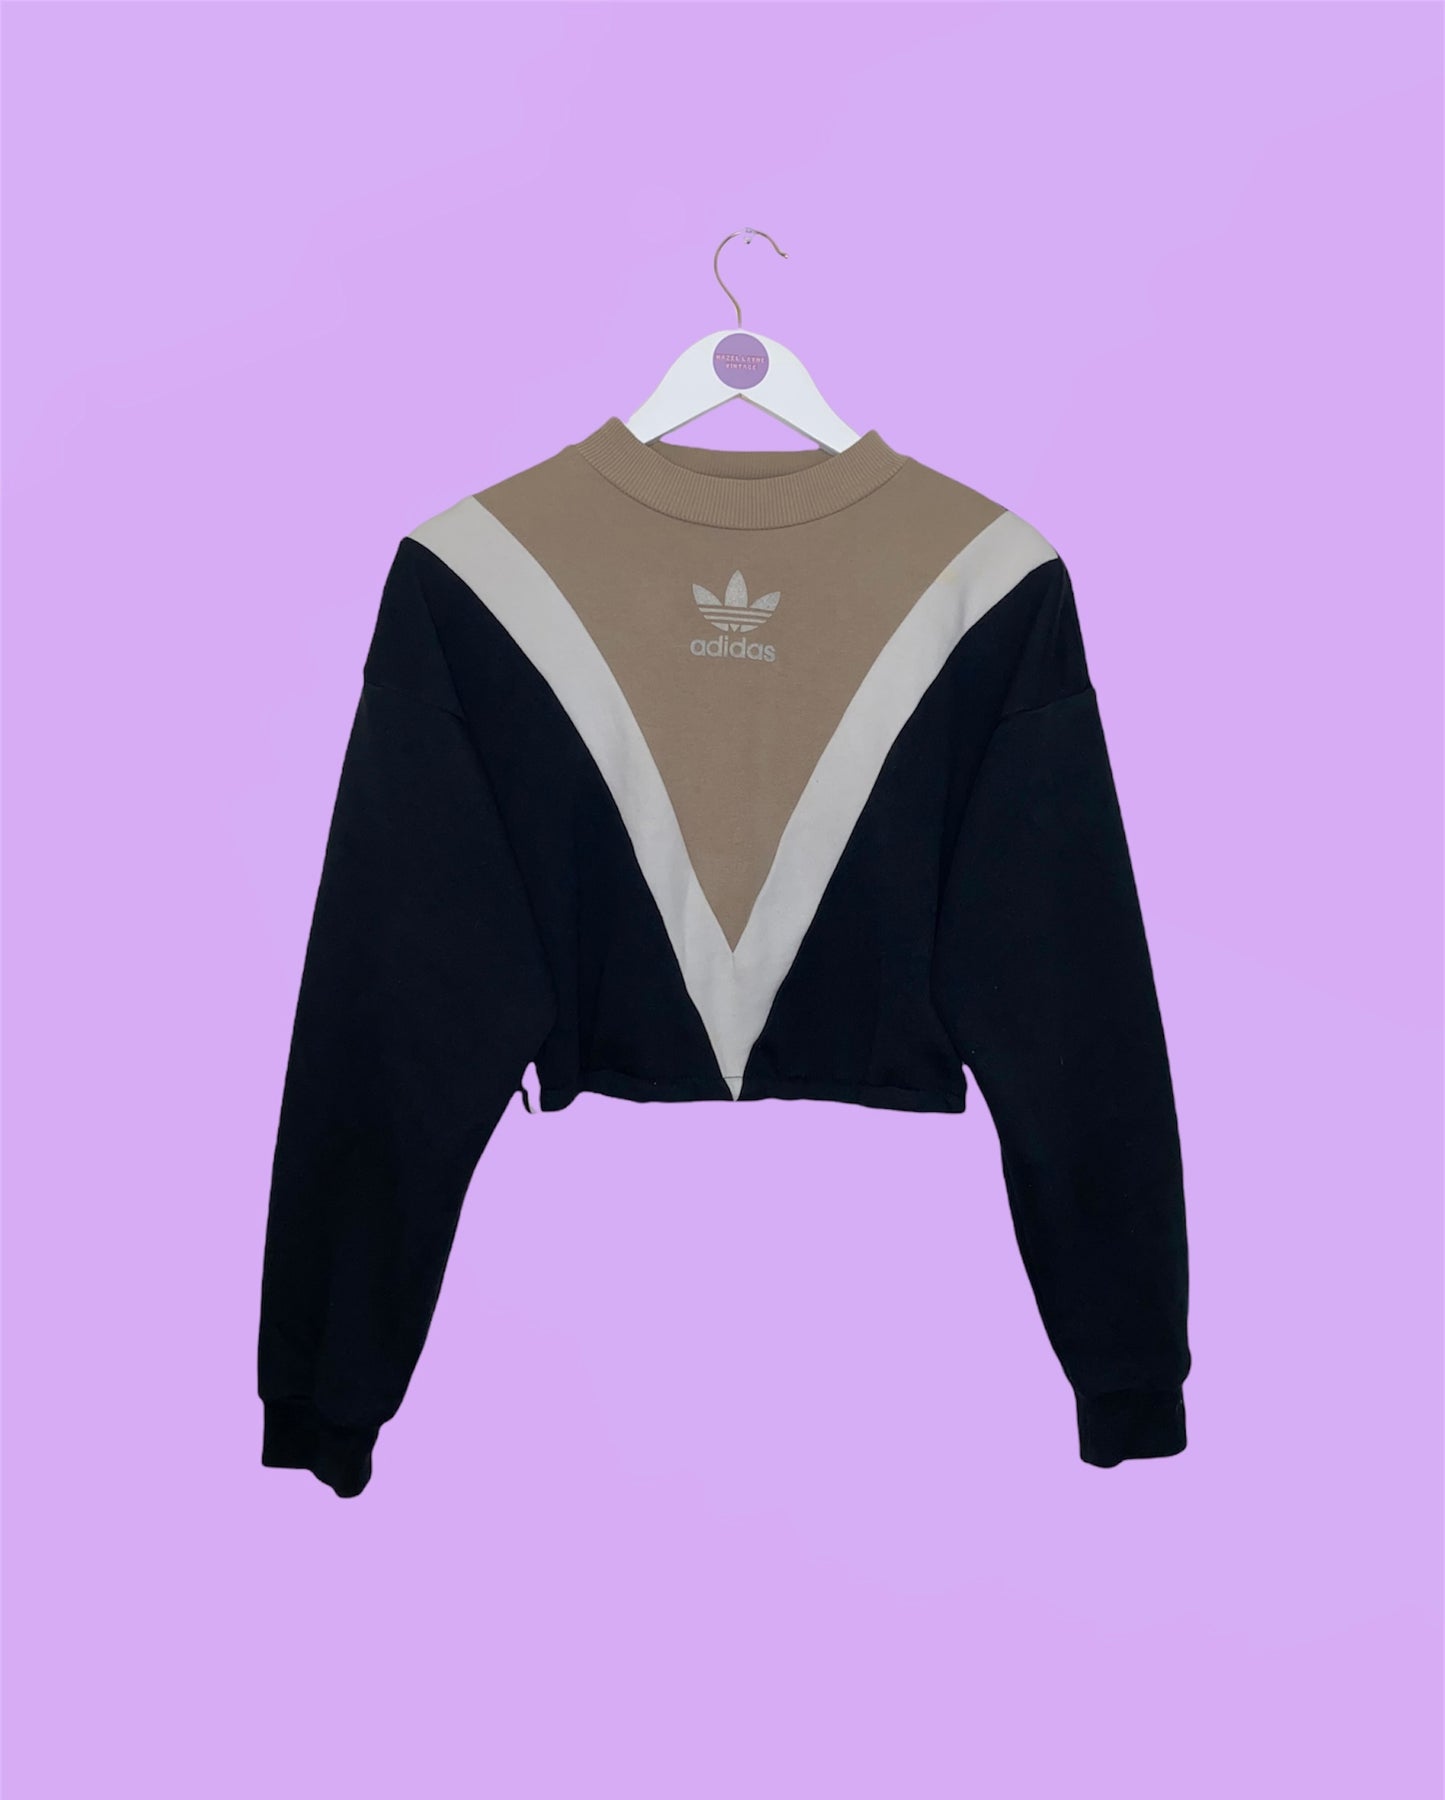 black and beige cropped sweatshirt with white adidas logo shown on a white clothes hanger on a lilac background